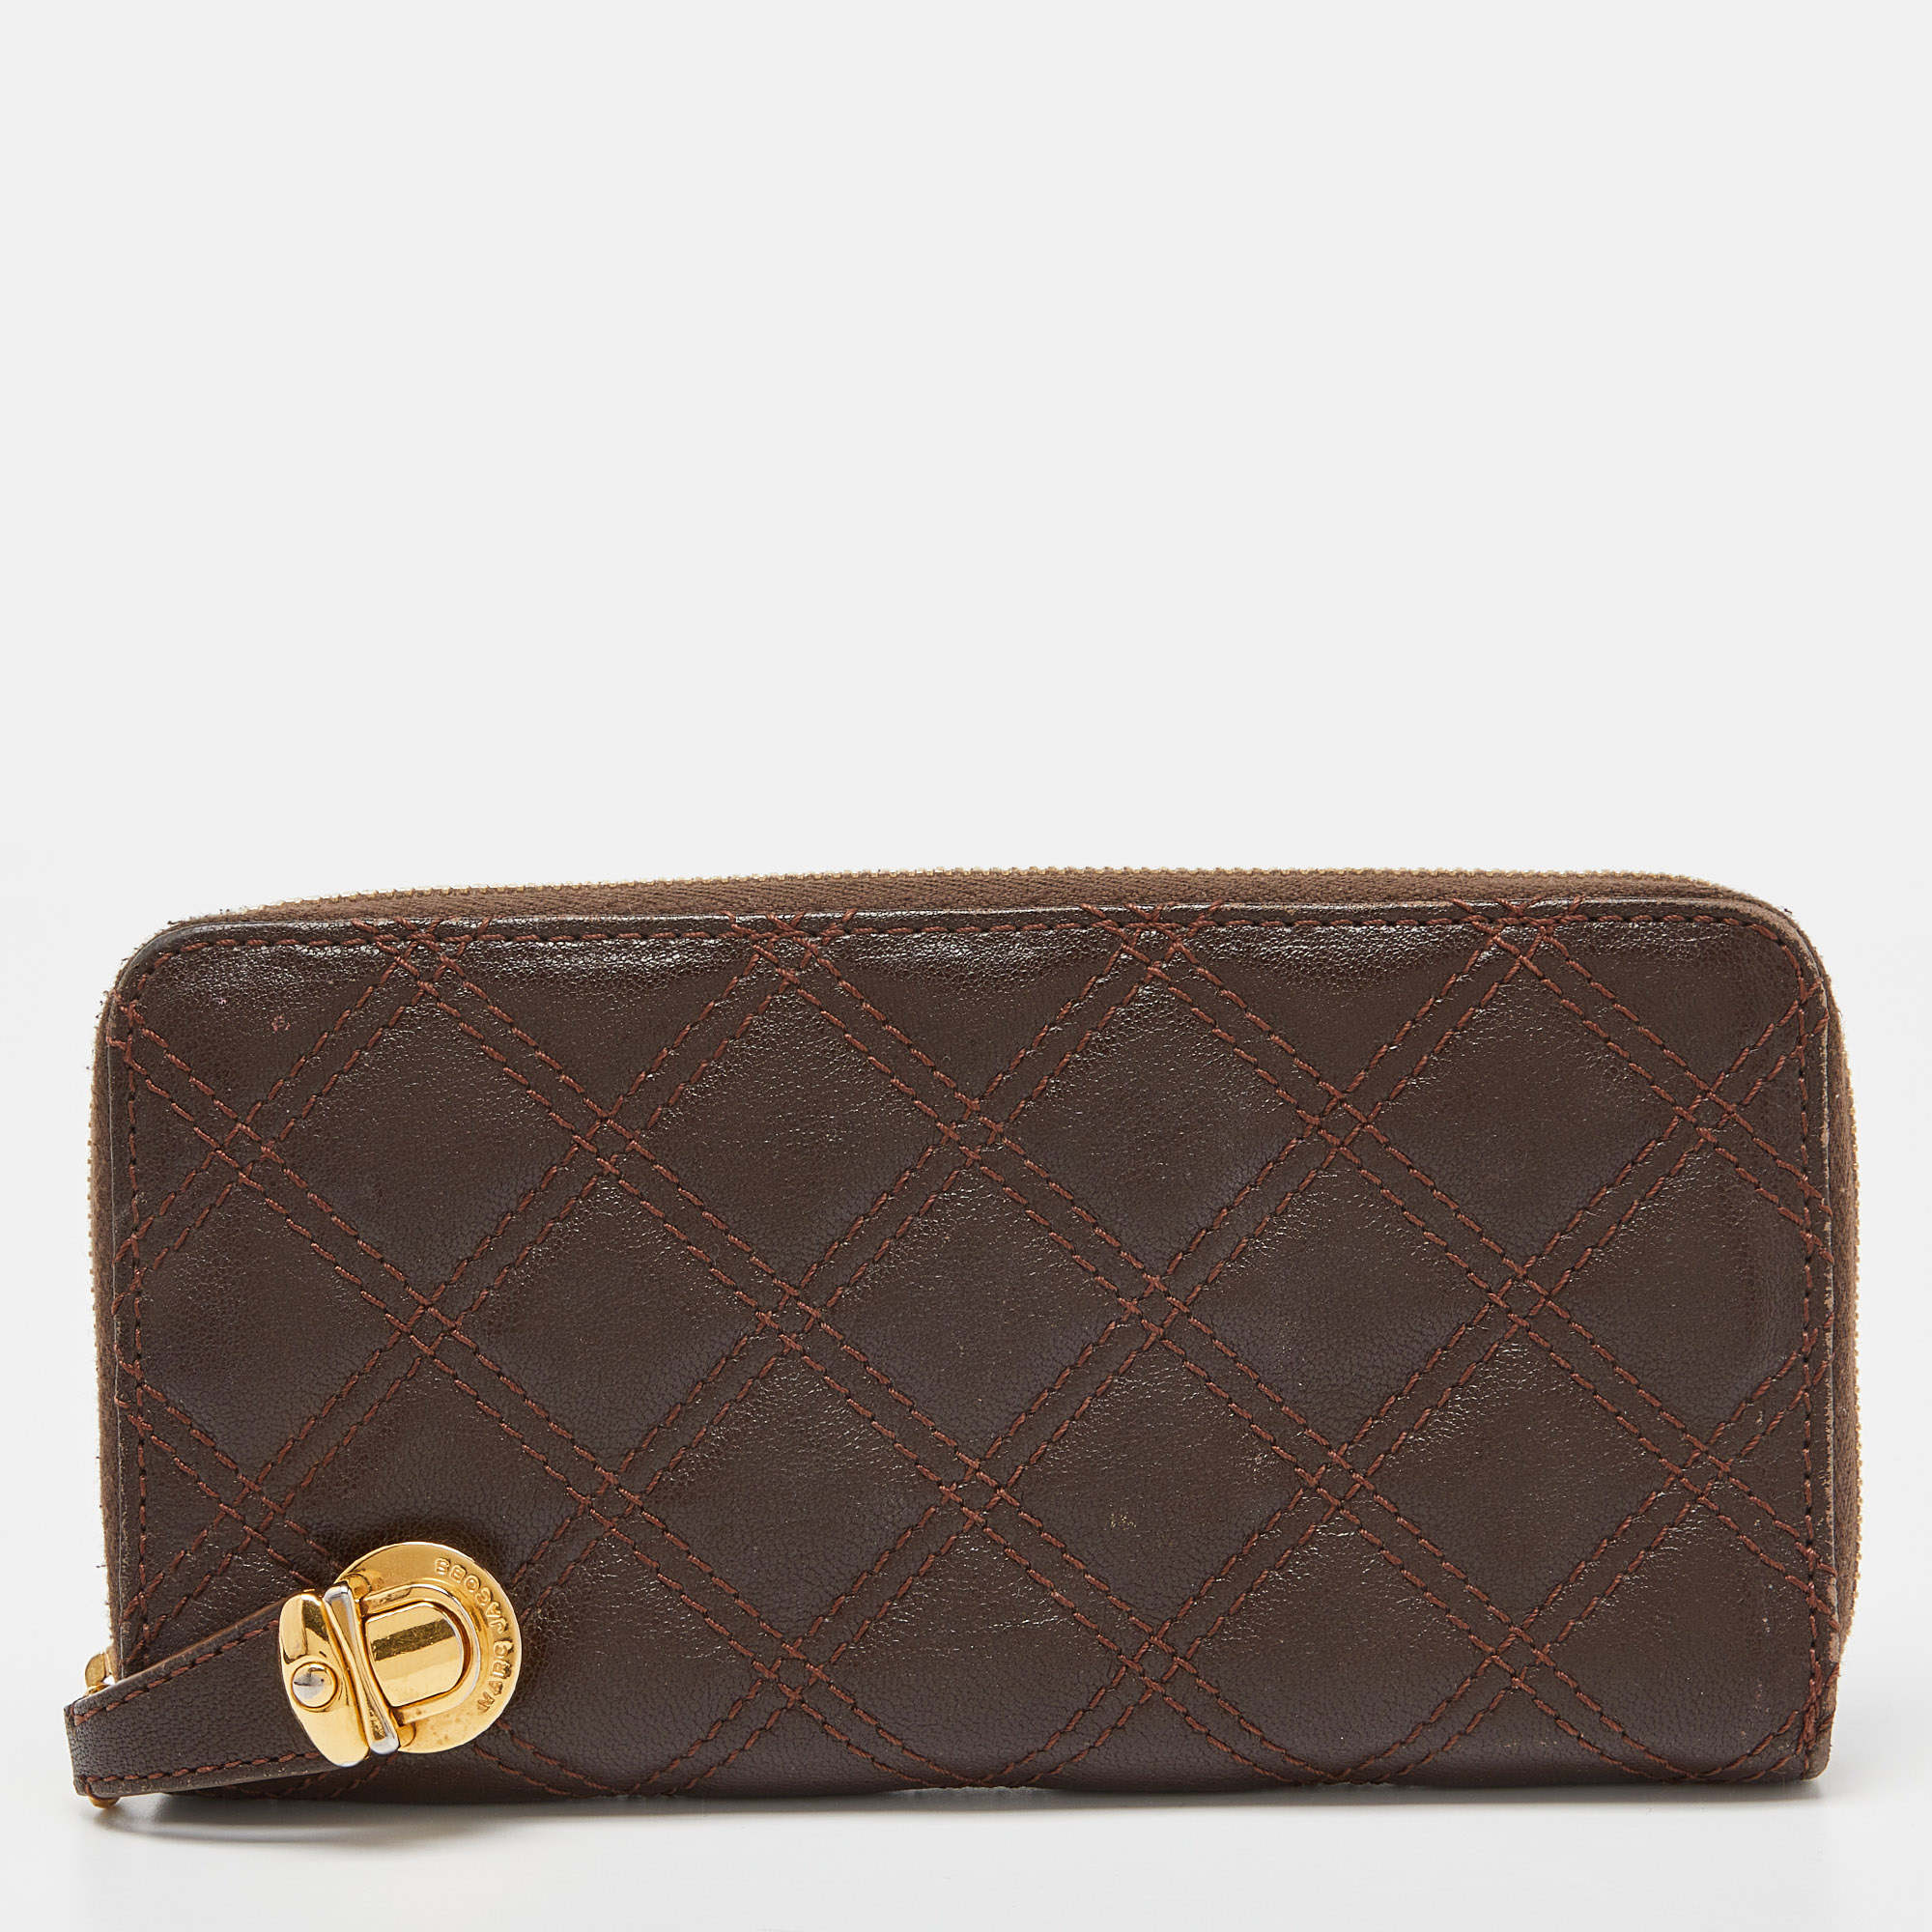 Marc Jacobs Brown Quilted Leather Deluxe Zip Around Wallet